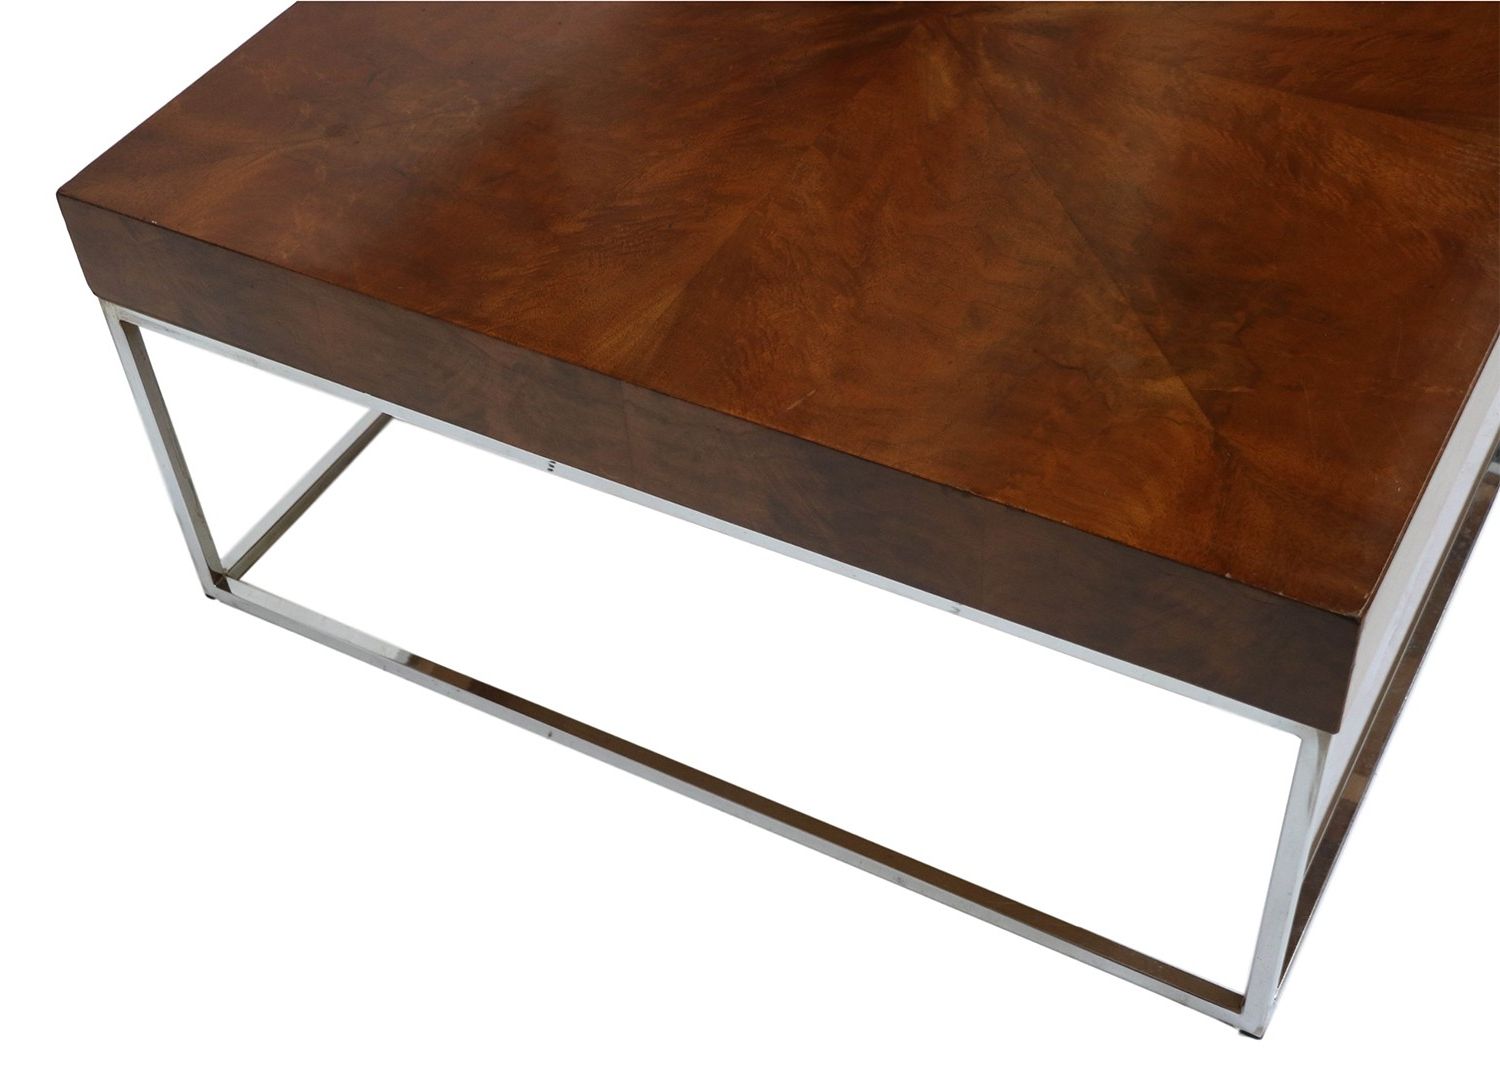 Walnut And Gold Rectangular Coffee Tables Throughout 2019 Mid Century Modern Walnut Chrome Square Coffee Table (View 12 of 20)